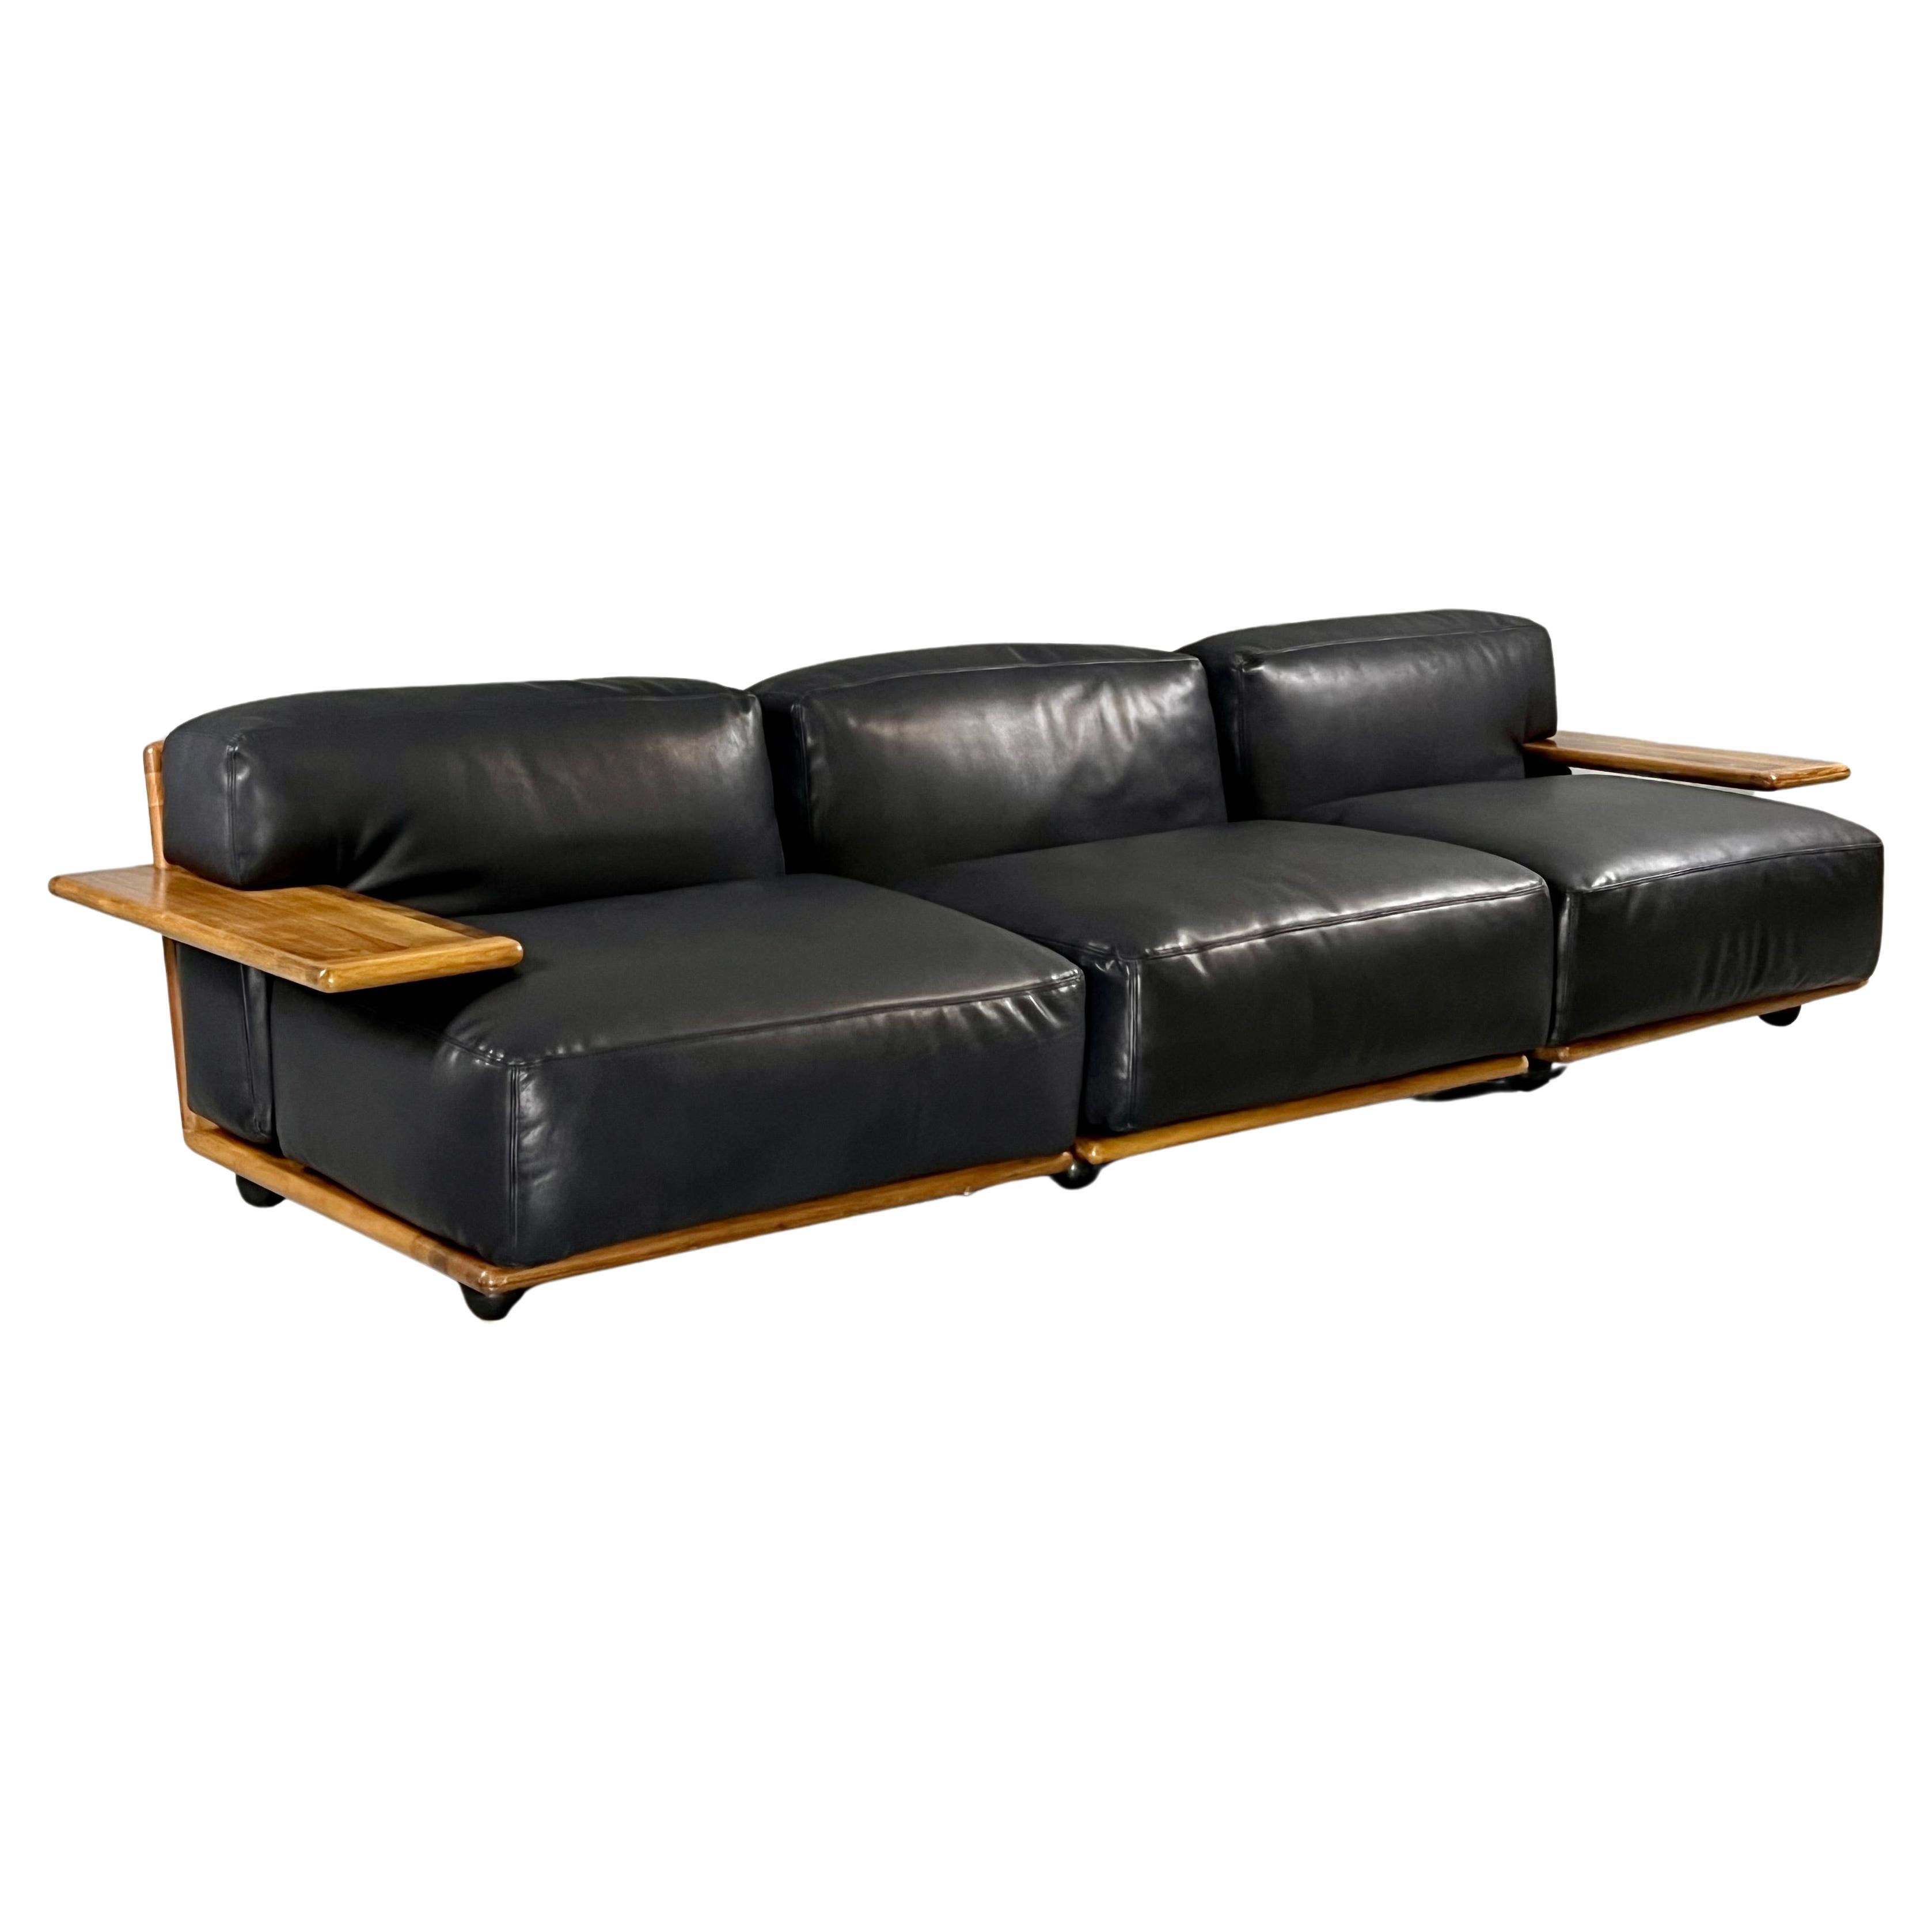 Late 20th Century Black Leather & Walnut Pianura Sectional Sofa by Mario Bellini For Sale